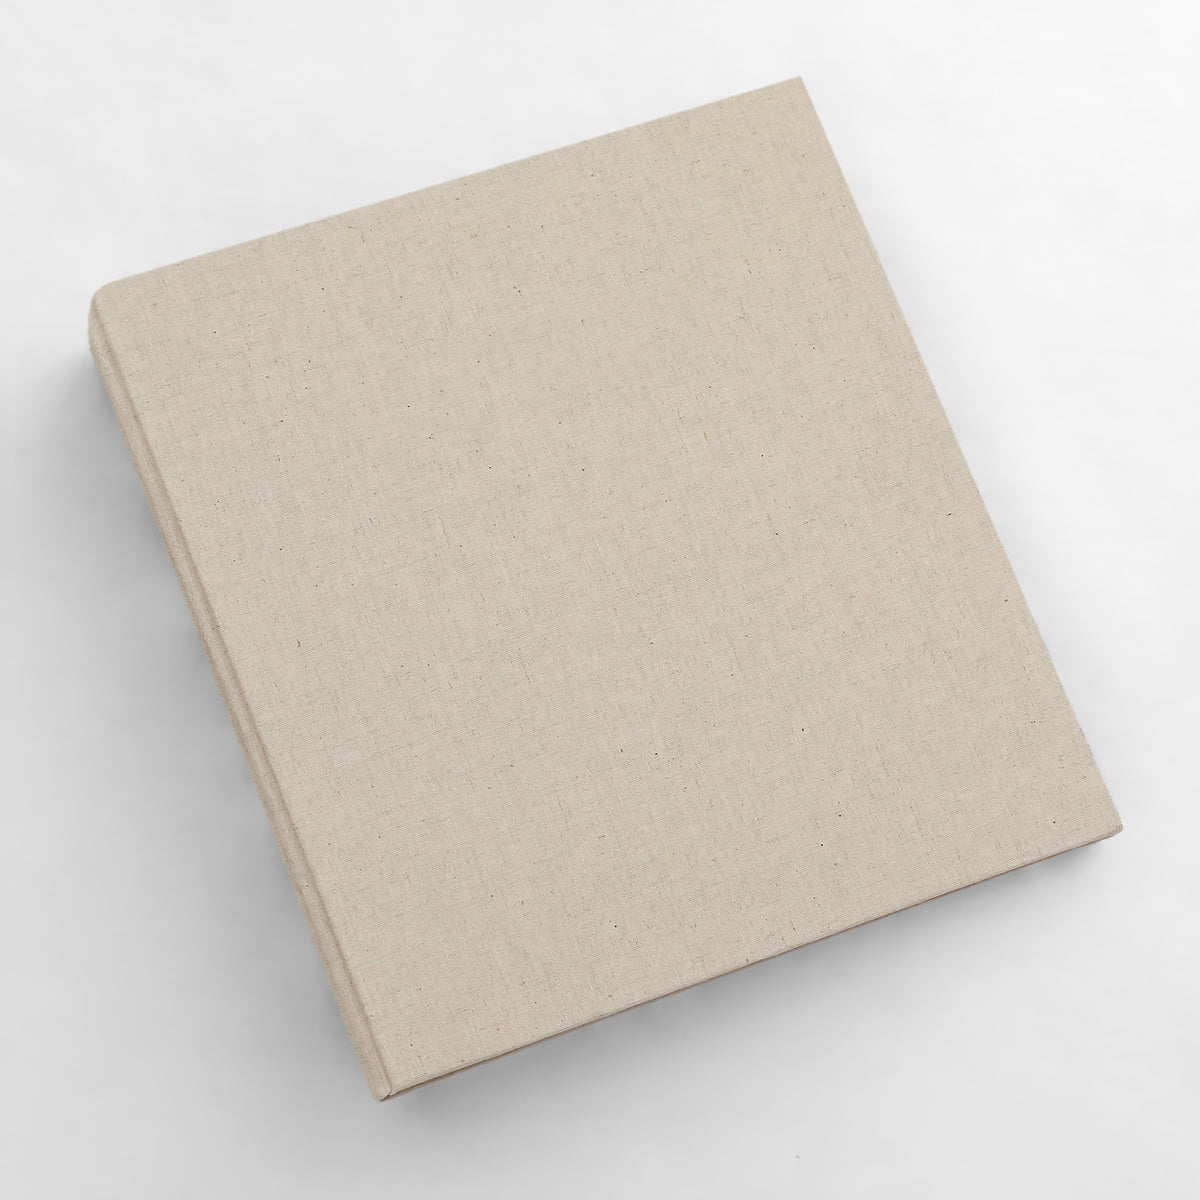 Large Photo Binder For 4x6 Photos | Cover: Natural Linen | Available Personalized